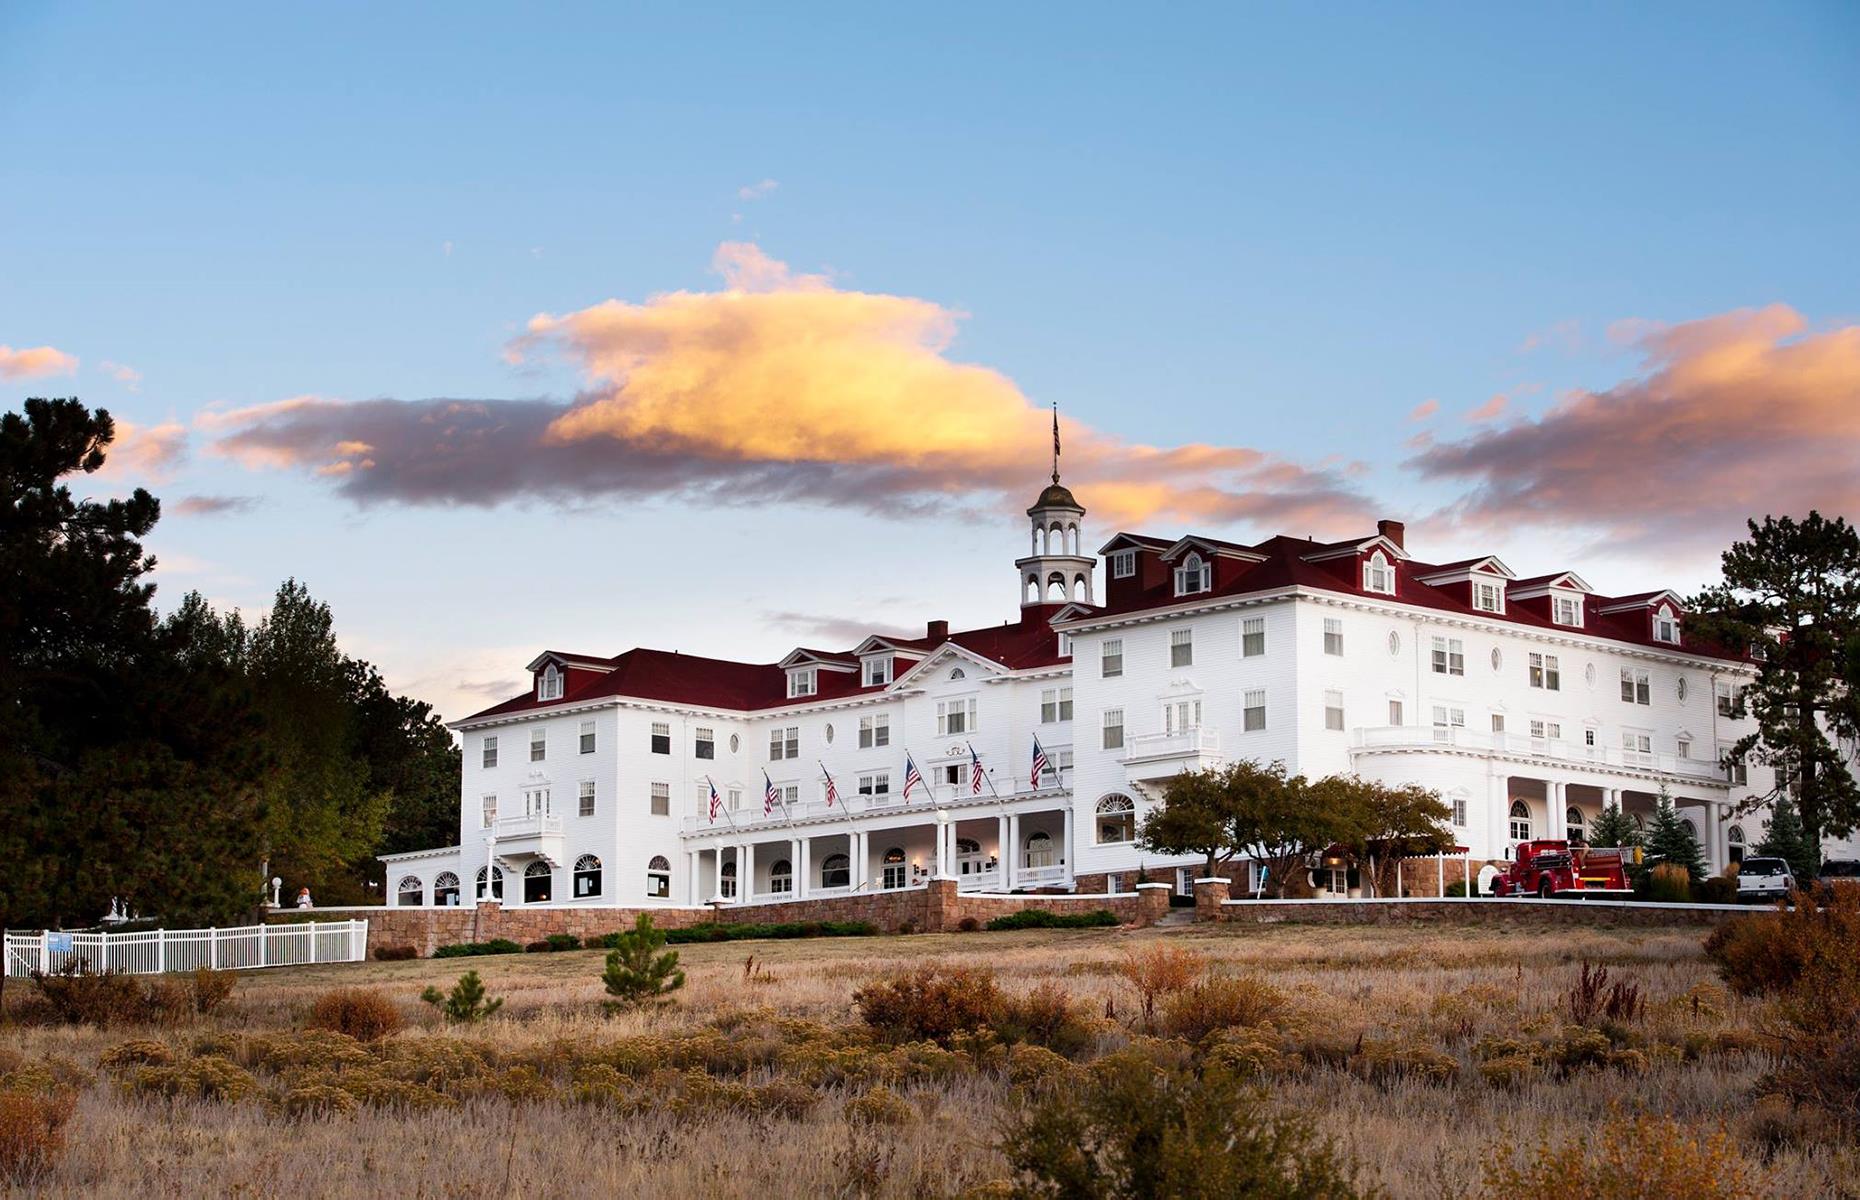 <p>A night at <a href="https://www.booking.com/hotel/us/the-stanley.en-gb.html?aid=1280739" rel="nofollow” target=">The Stanley Hotel</a> was all it took to inspire Stephen King to pen his classic horror novel <em>The Shining</em>. But the spooky reputation pre-dates both the book and the spine-chilling film as the hotel's original owner and his wife Flora are reportedly often seen drifting through the lobby. Room 217, where King and his wife stayed, is said to be haunted by a housekeeper who perished on the hotel grounds. The hotel now runs ghost tours and typically attracts film buffs and spirit hunters from all over – <a href="https://www.stanleyhotel.com/night-tour.html">the spooky Night Tour</a> is currently restricted to 10 people with masks required.</p>